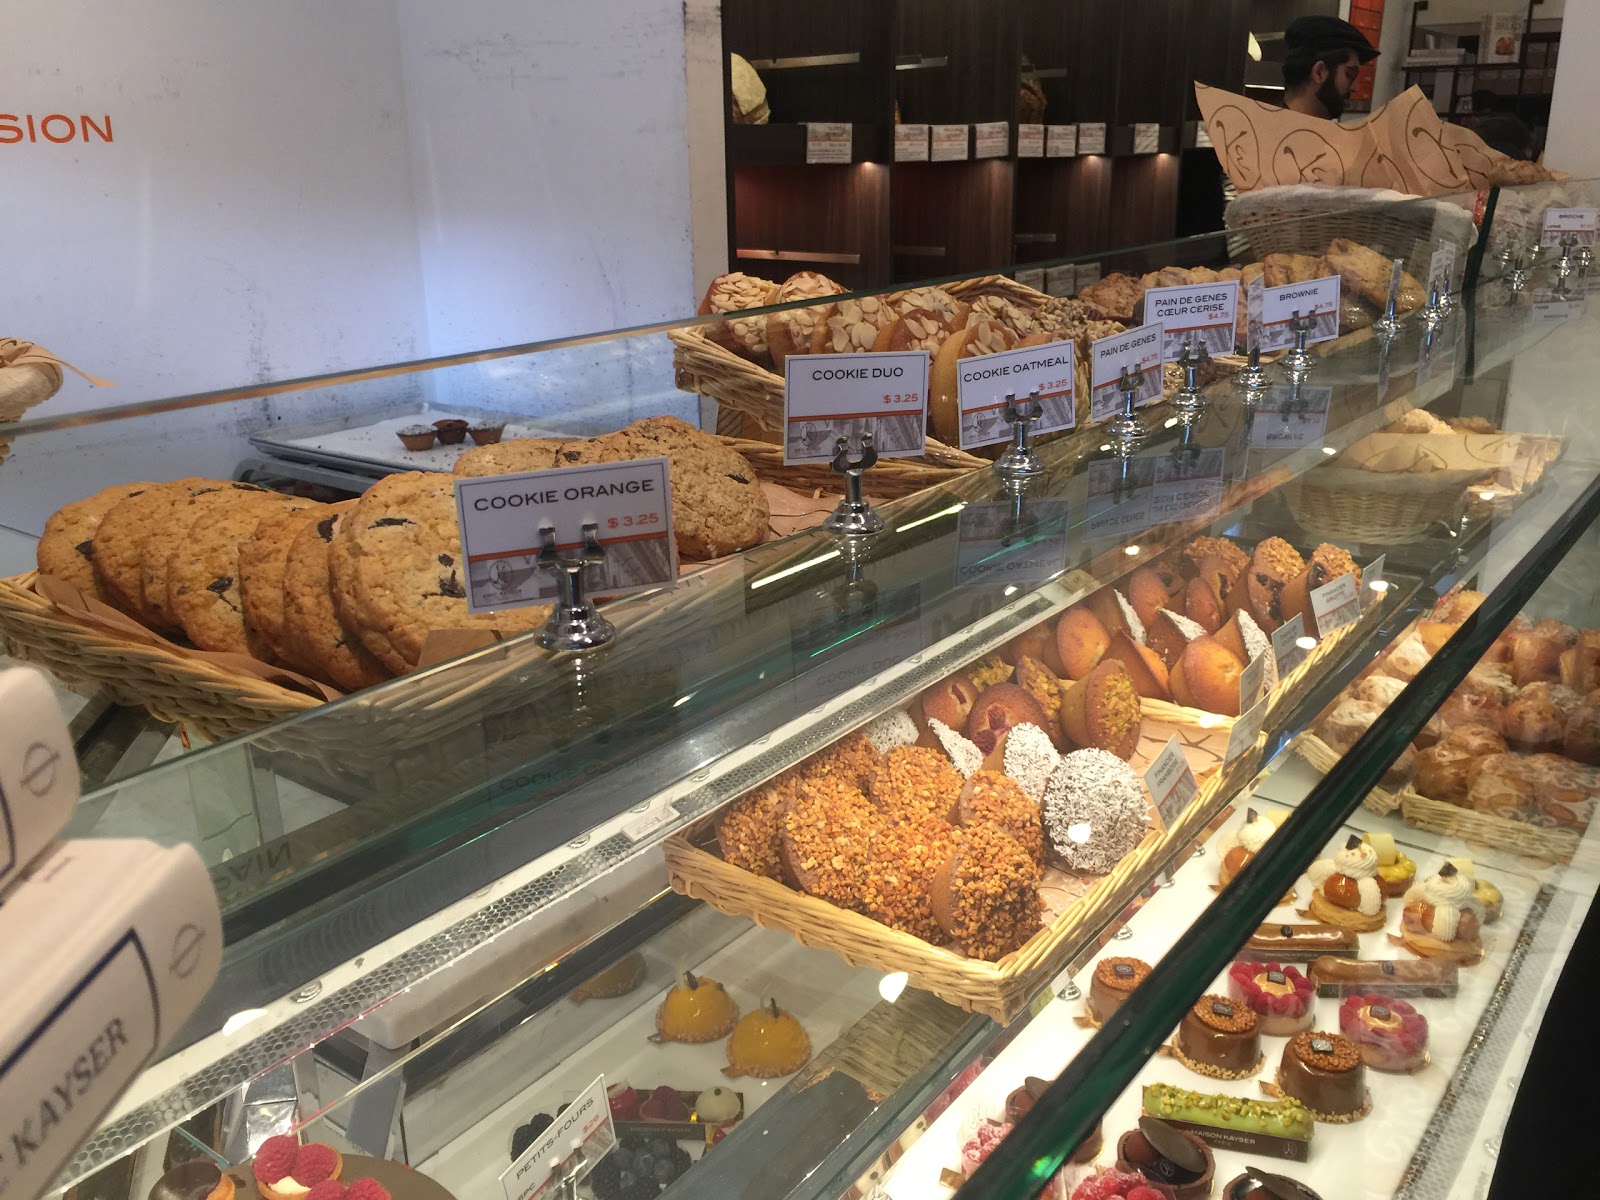 Photo of Maison Kayser in New York City, New York, United States - 4 Picture of Food, Point of interest, Establishment, Store, Bakery